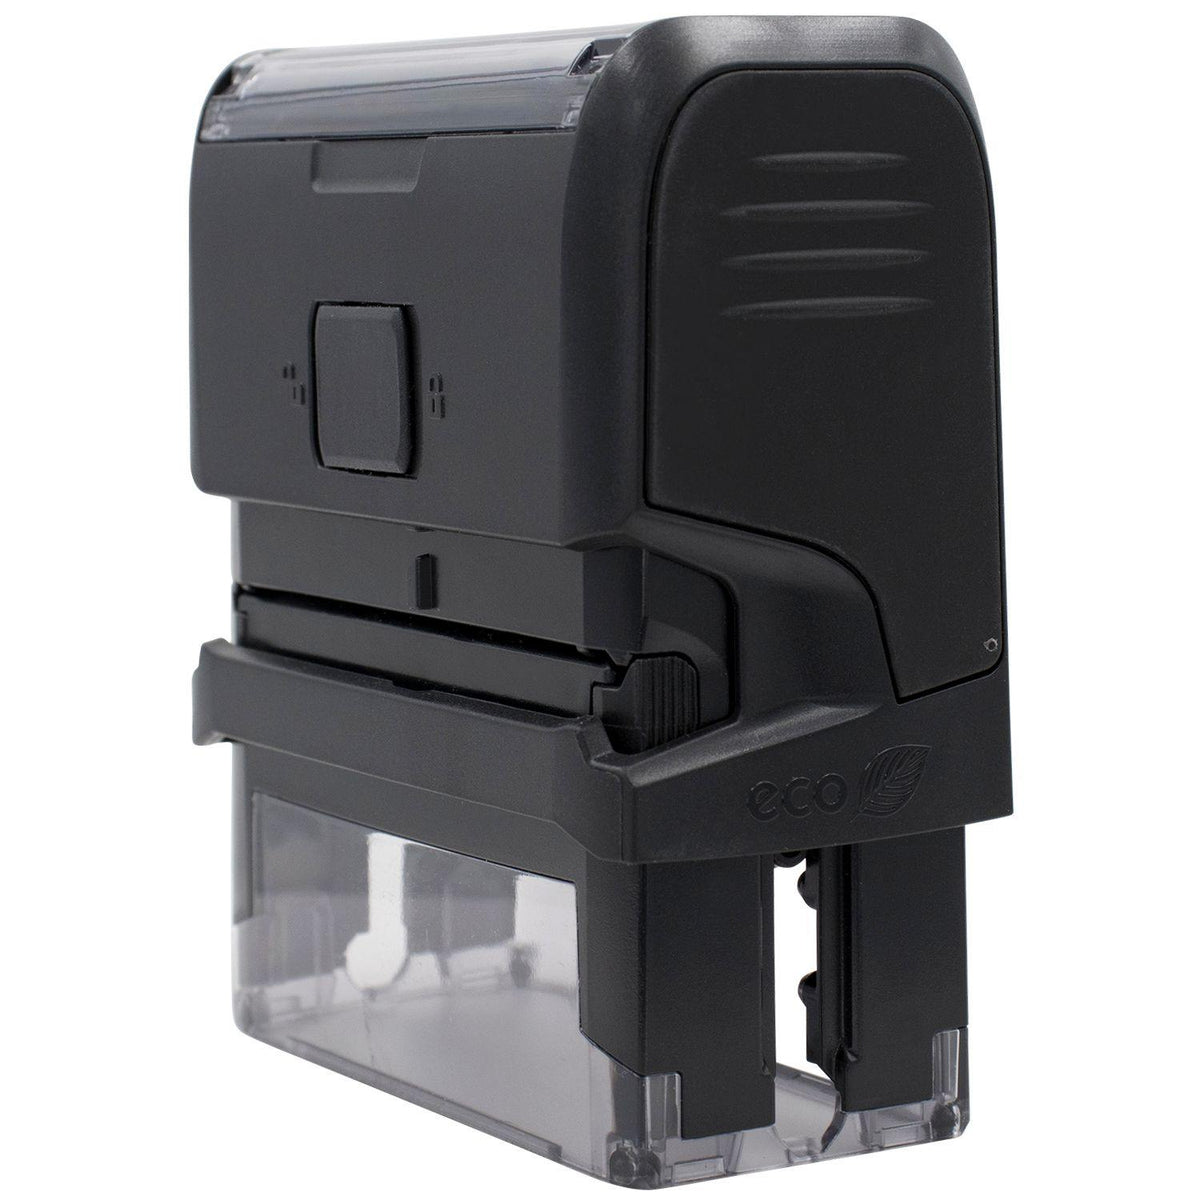 Self Inking E Mailed Stamp - Engineer Seal Stamps - Brand_Trodat, Impression Size_Small, Stamp Type_Self-Inking Stamp, Type of Use_Office